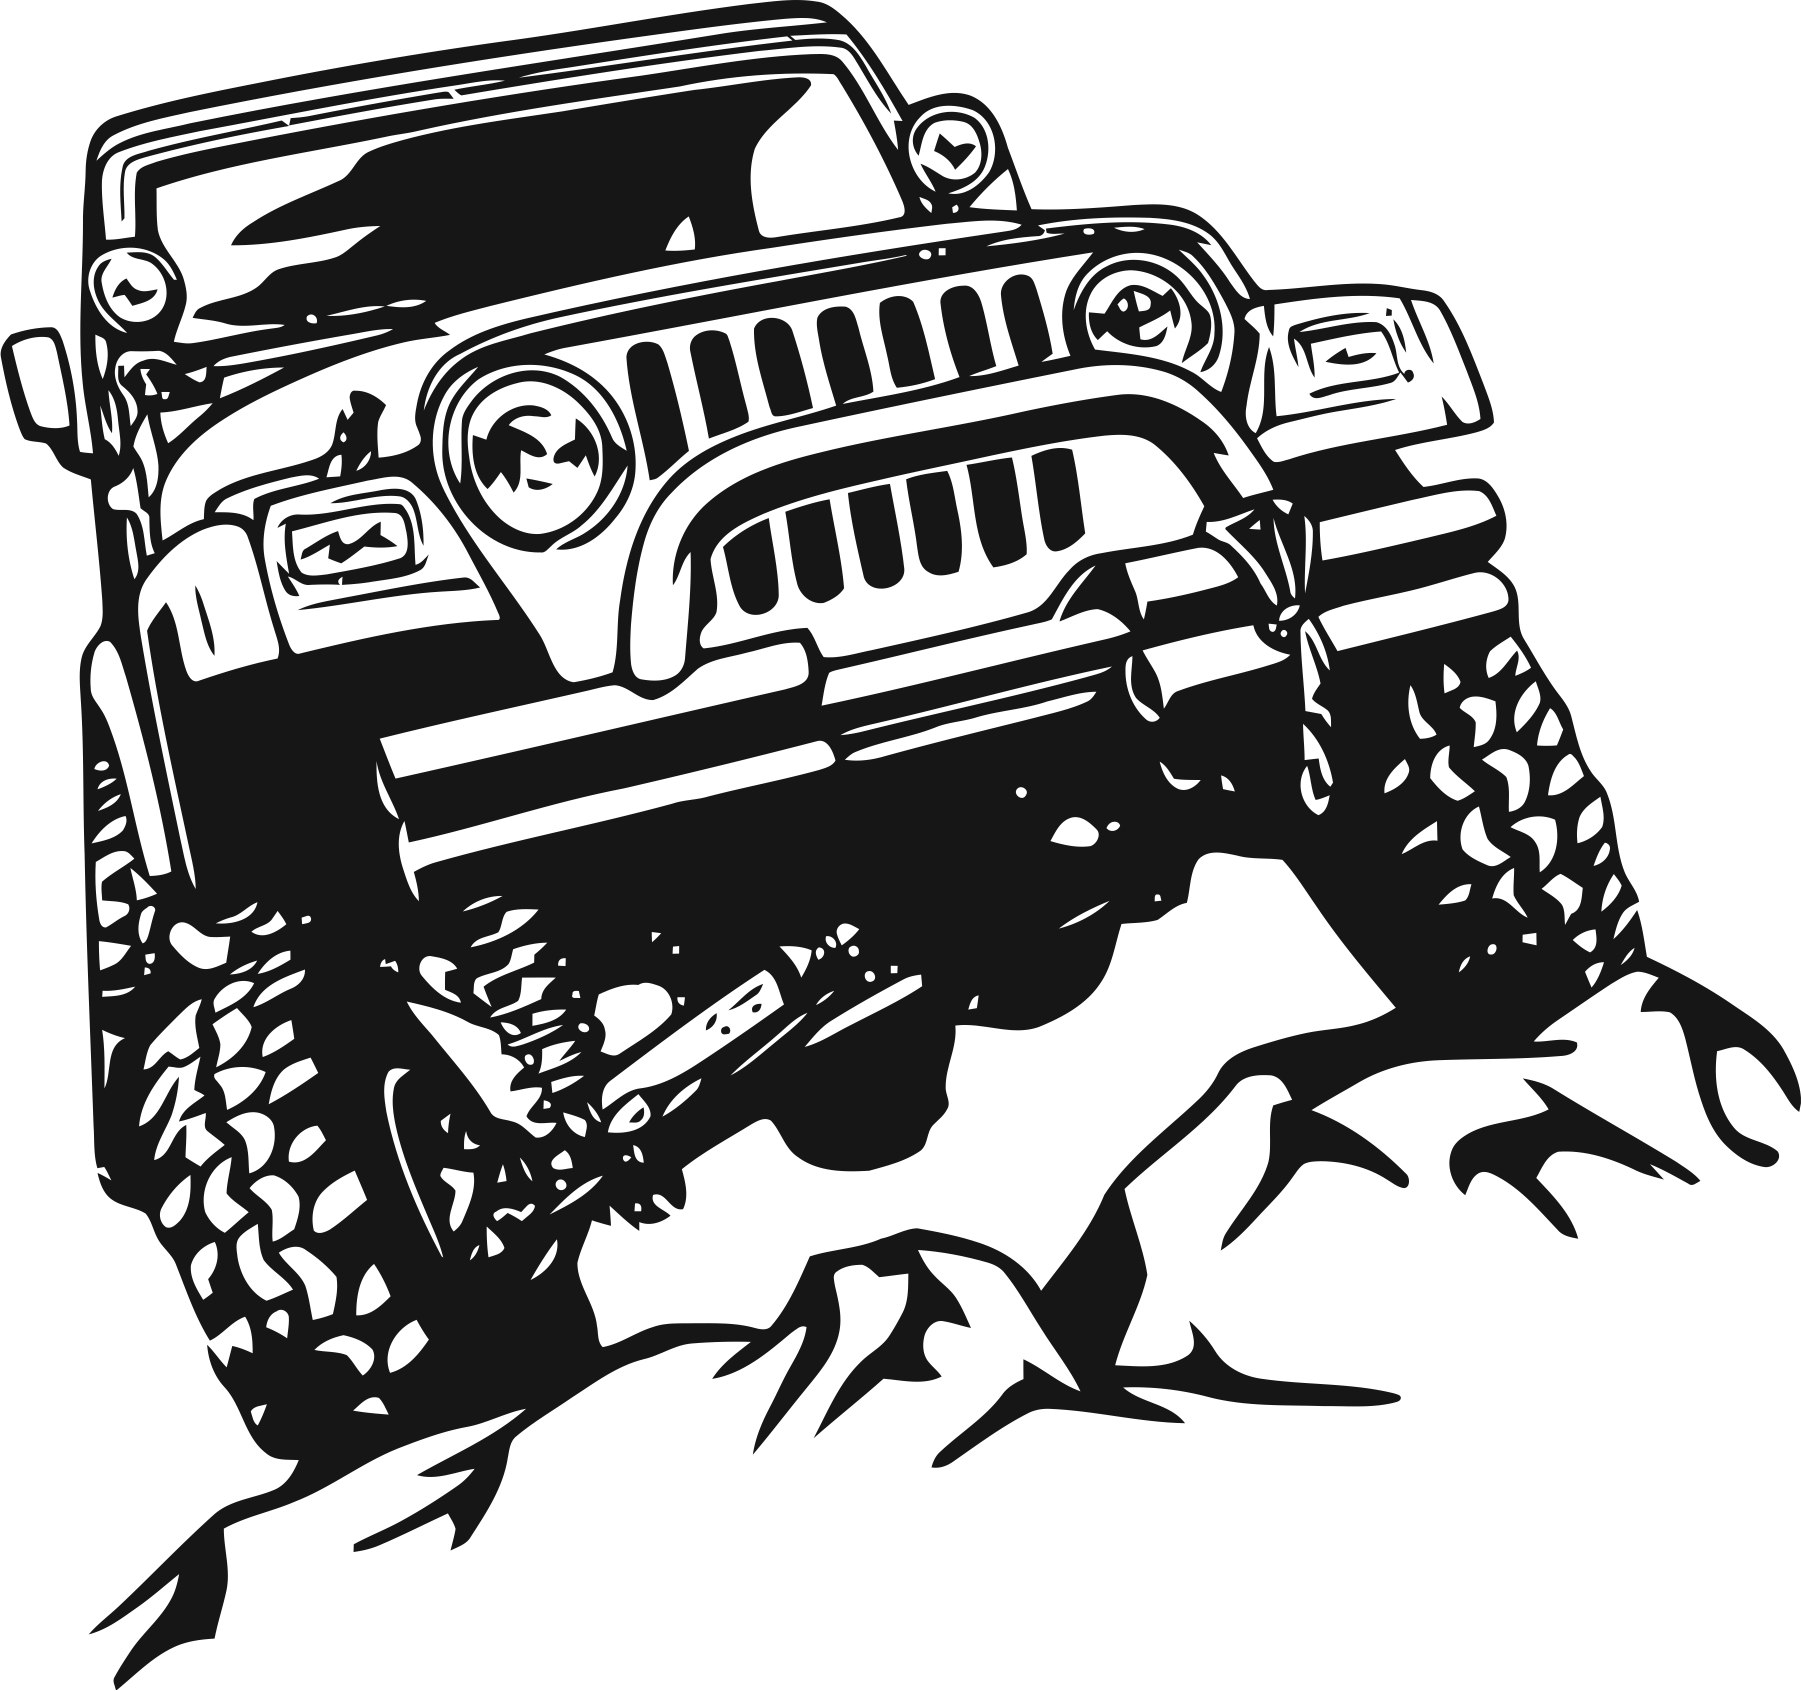 Download Offroad Sticker Free Vector cdr Download - 3axis.co